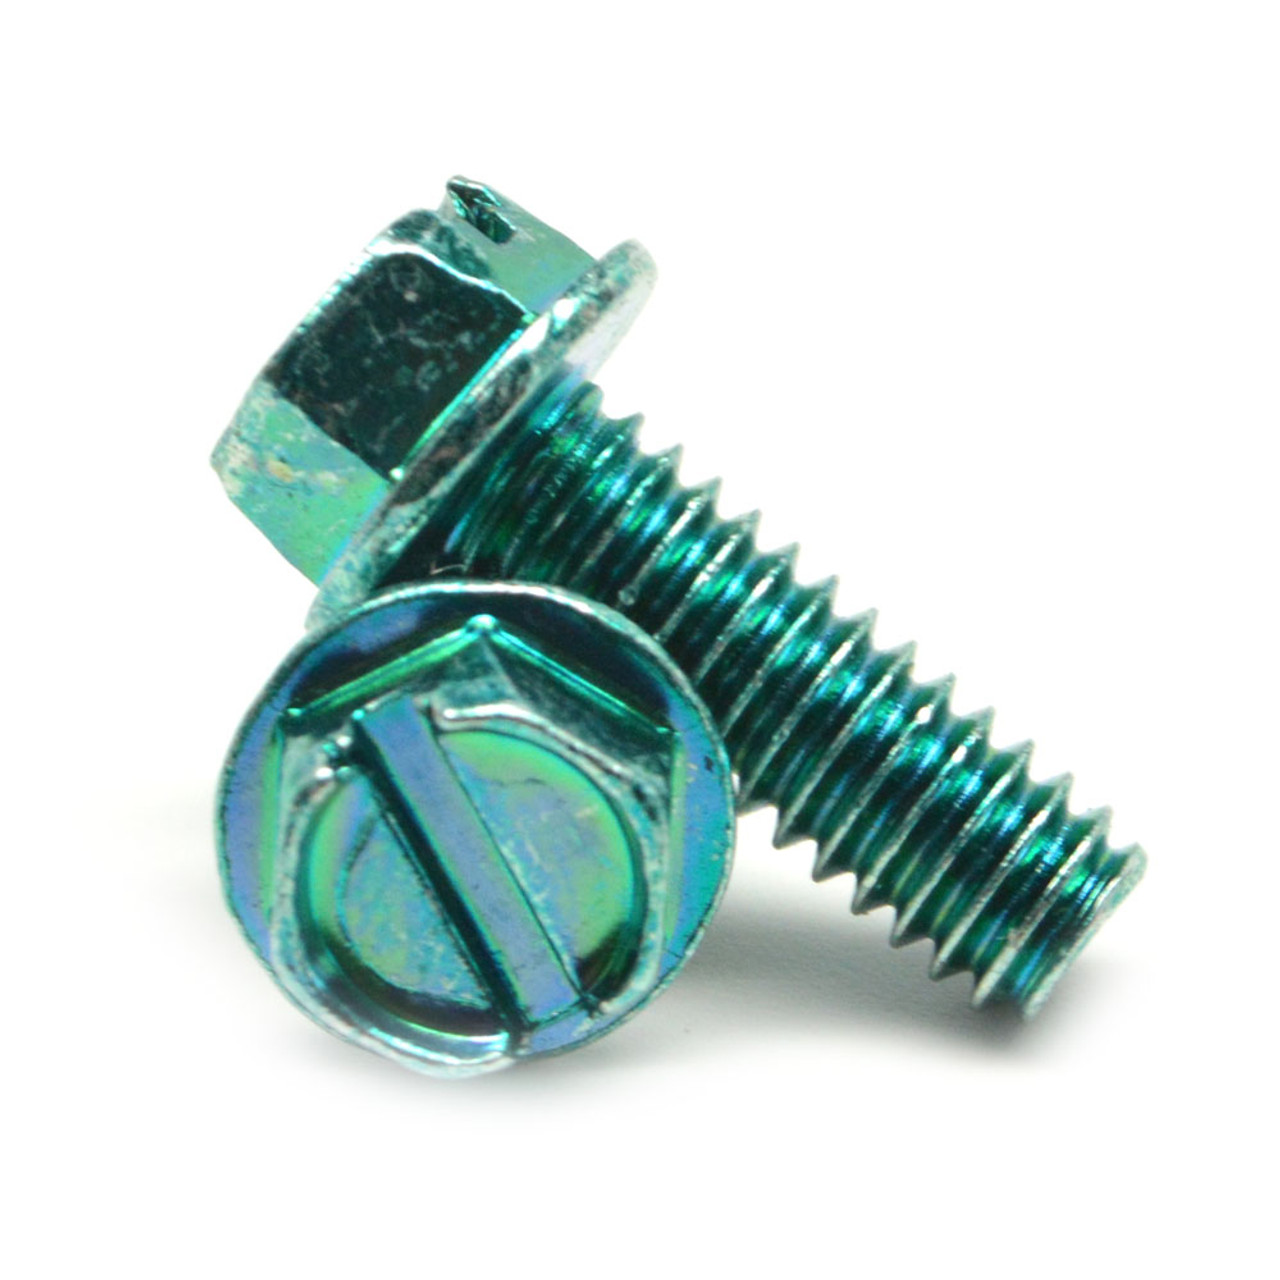 #8-32 x 1/2" (FT) Coarse Thread Machine Screw Slotted Hex Washer Head Low Carbon Steel Green Zinc Plated